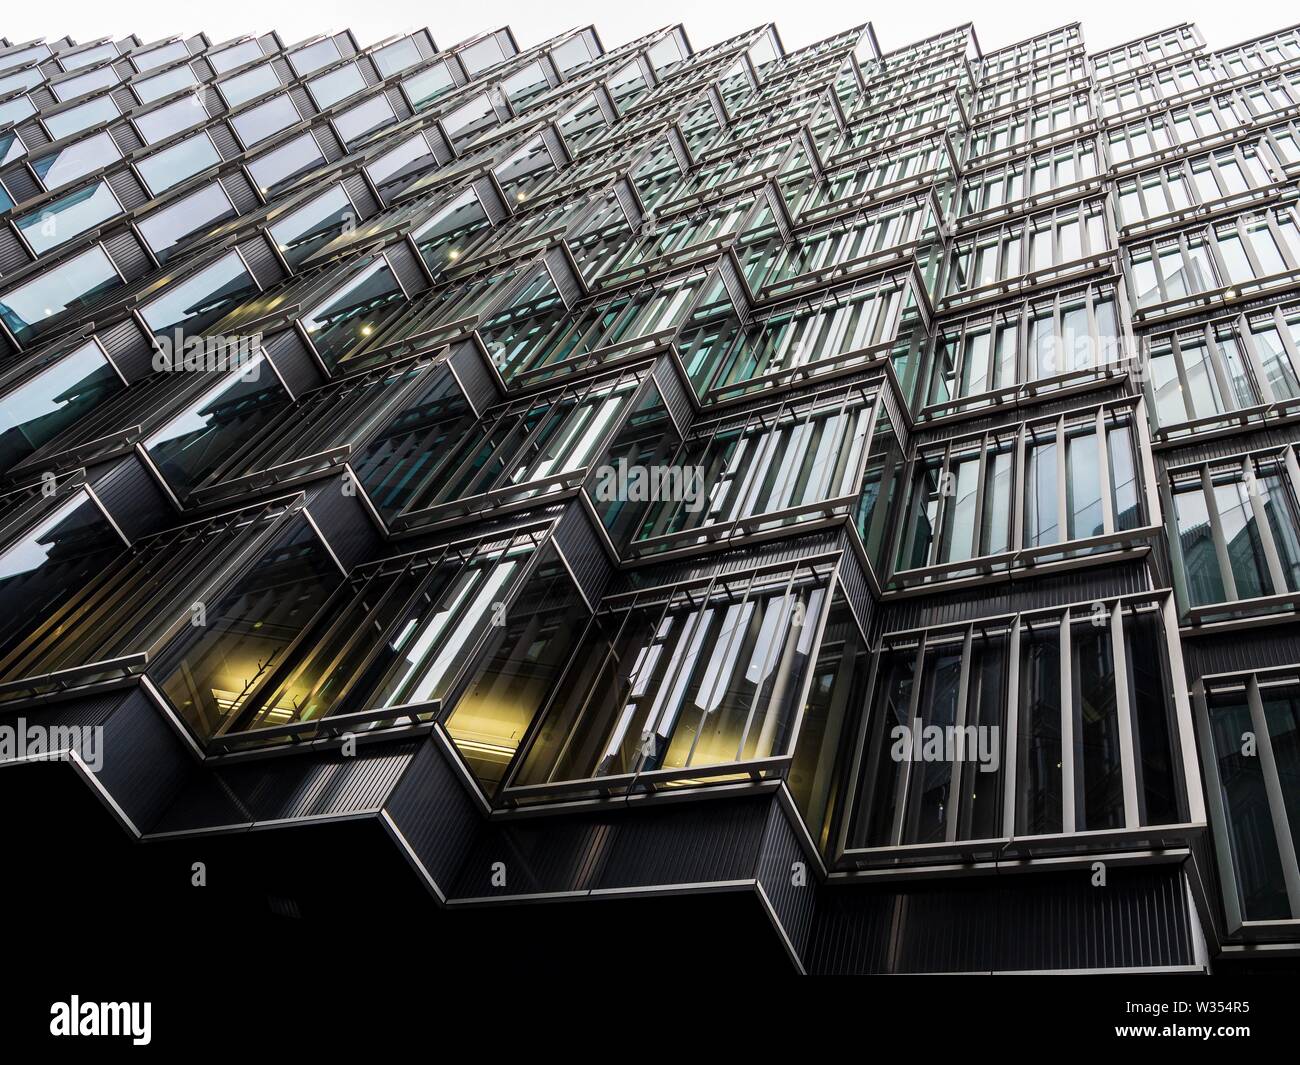 Looking up at the jagged side of a modern office in London on a gloomy day Stock Photo